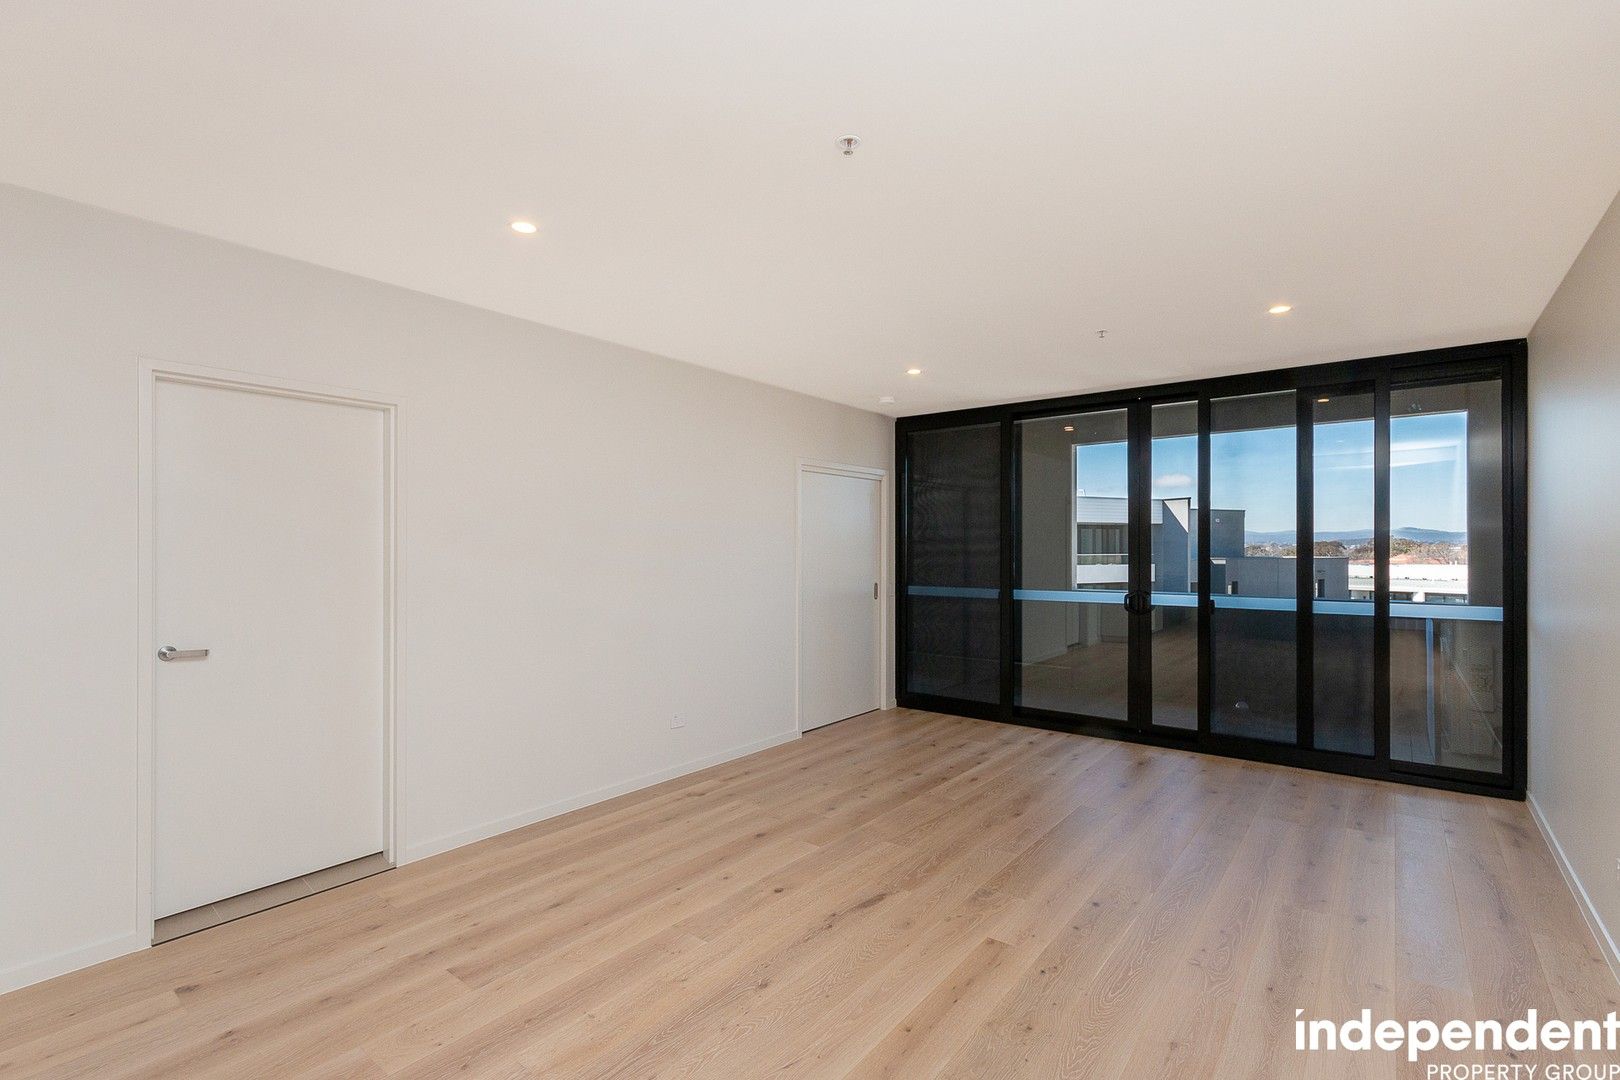 1 bedrooms Apartment / Unit / Flat in 434/34 Eyre Street KINGSTON ACT, 2604